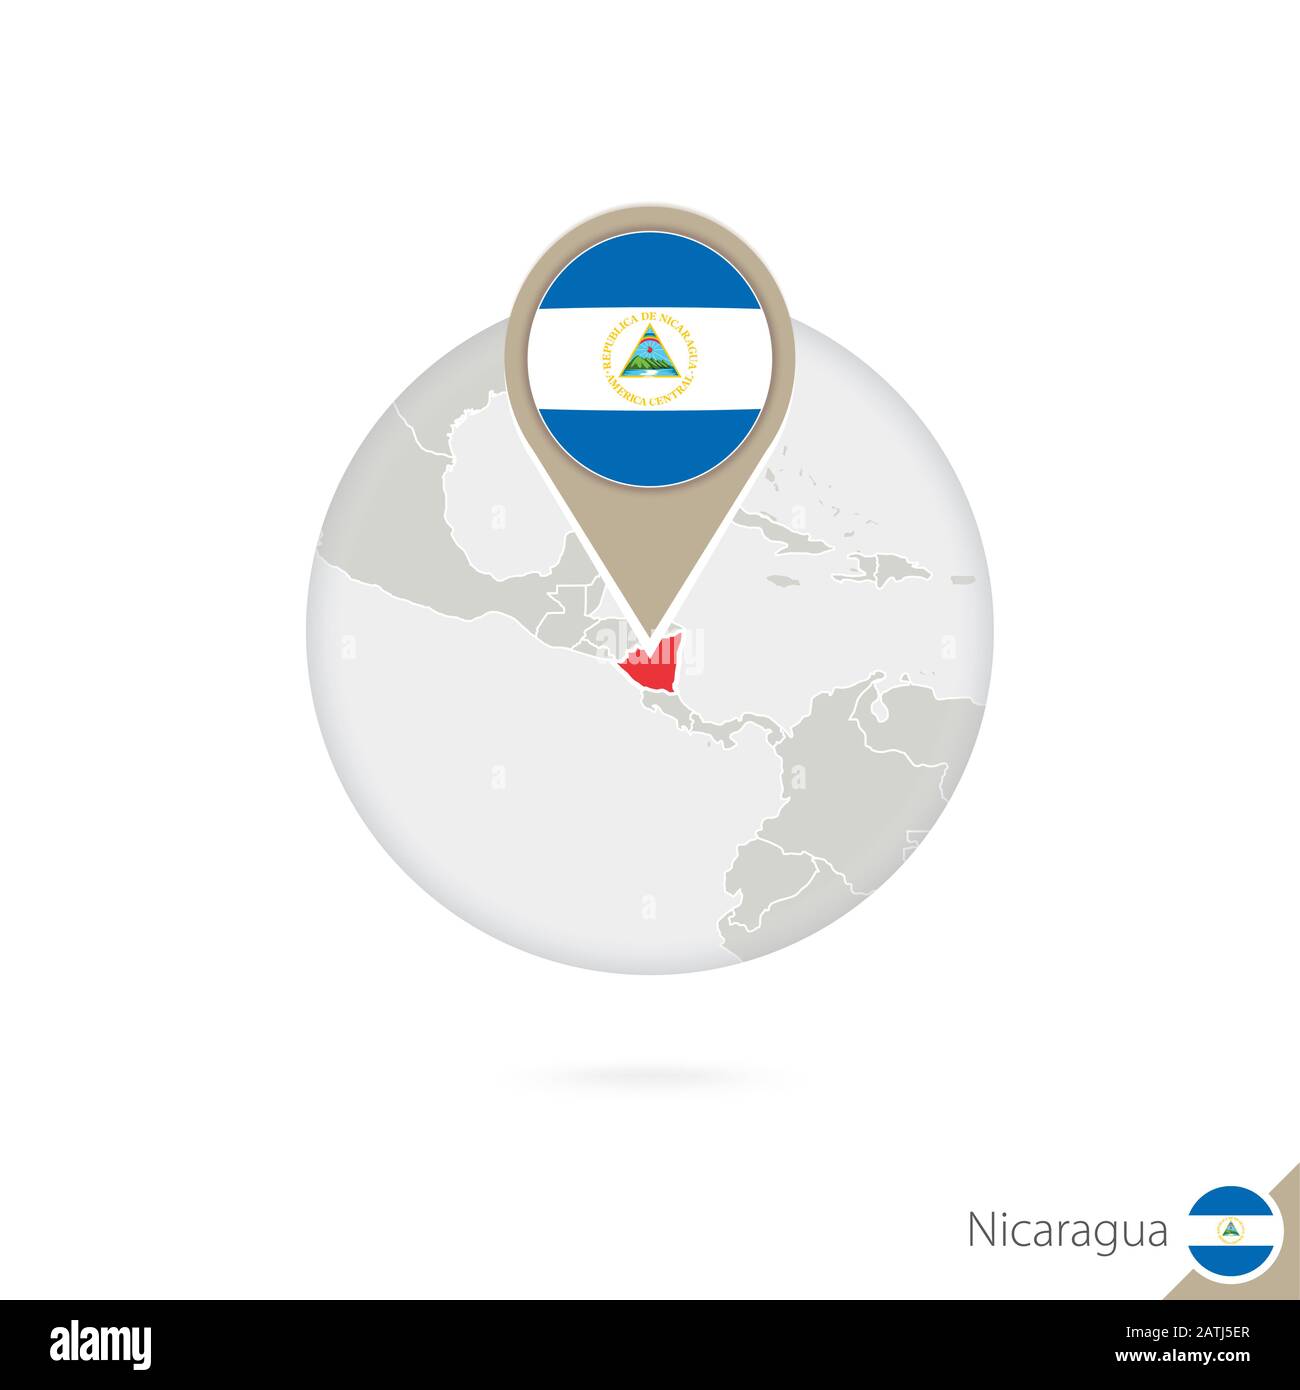 Nicaragua map and flag in circle. Map of Nicaragua, Nicaragua flag pin. Map of Nicaragua in the style of the globe. Vector Illustration. Stock Vector